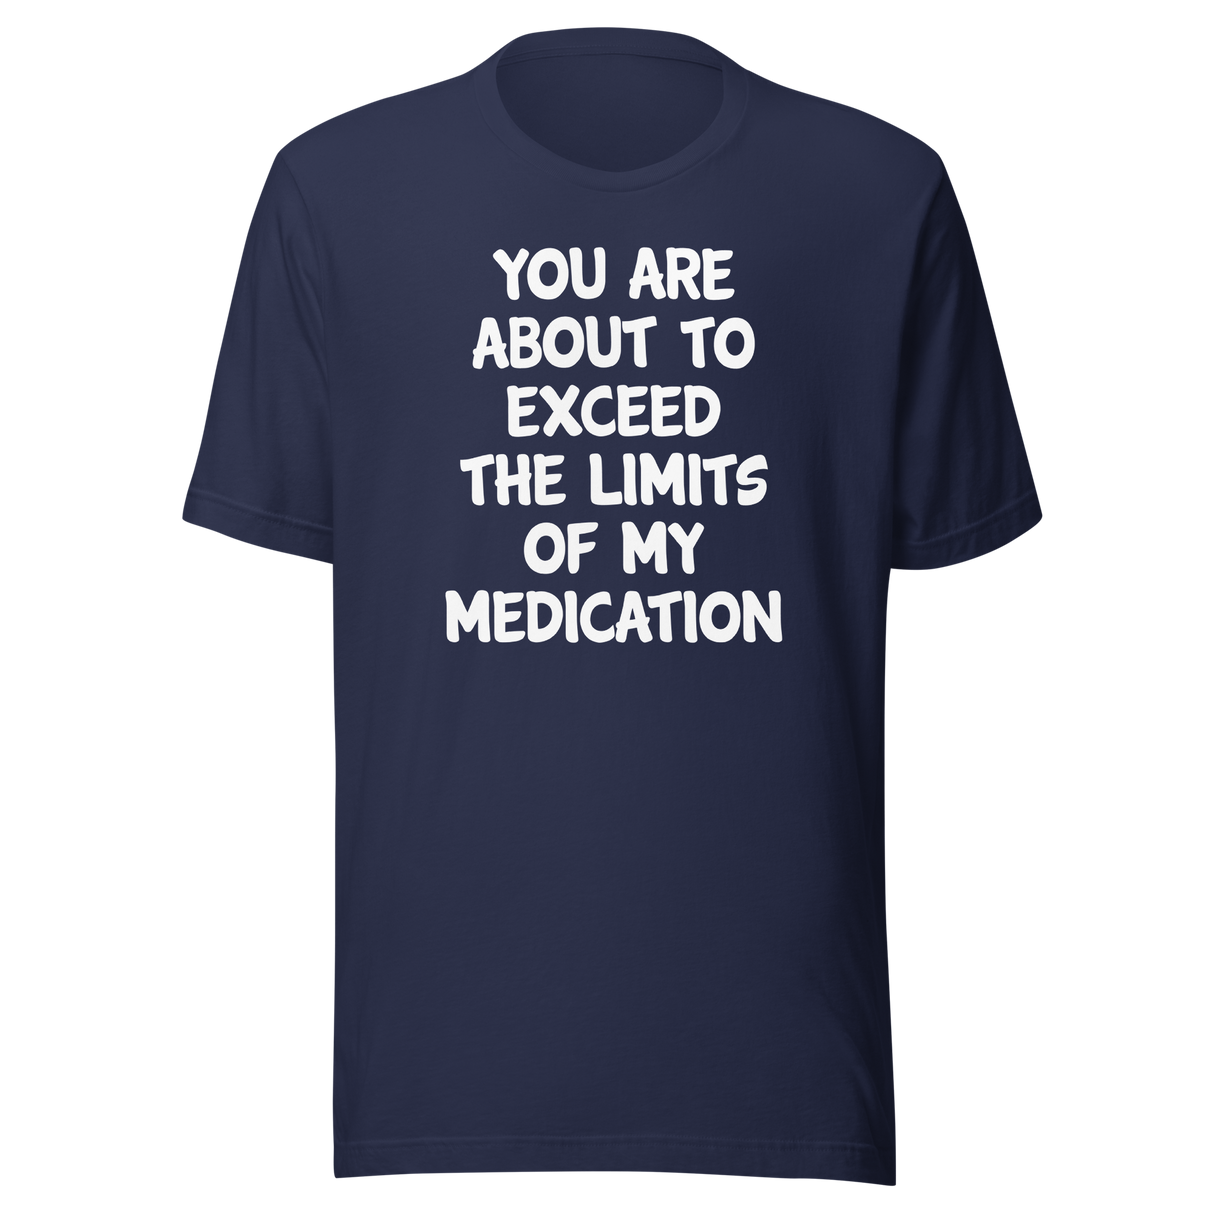 you-are-about-to-exceed-the-limits-of-my-medication-funny-tee-laughter-t-shirt-humor-tee-comedy-t-shirt-hilarious-tee-1#color_navy